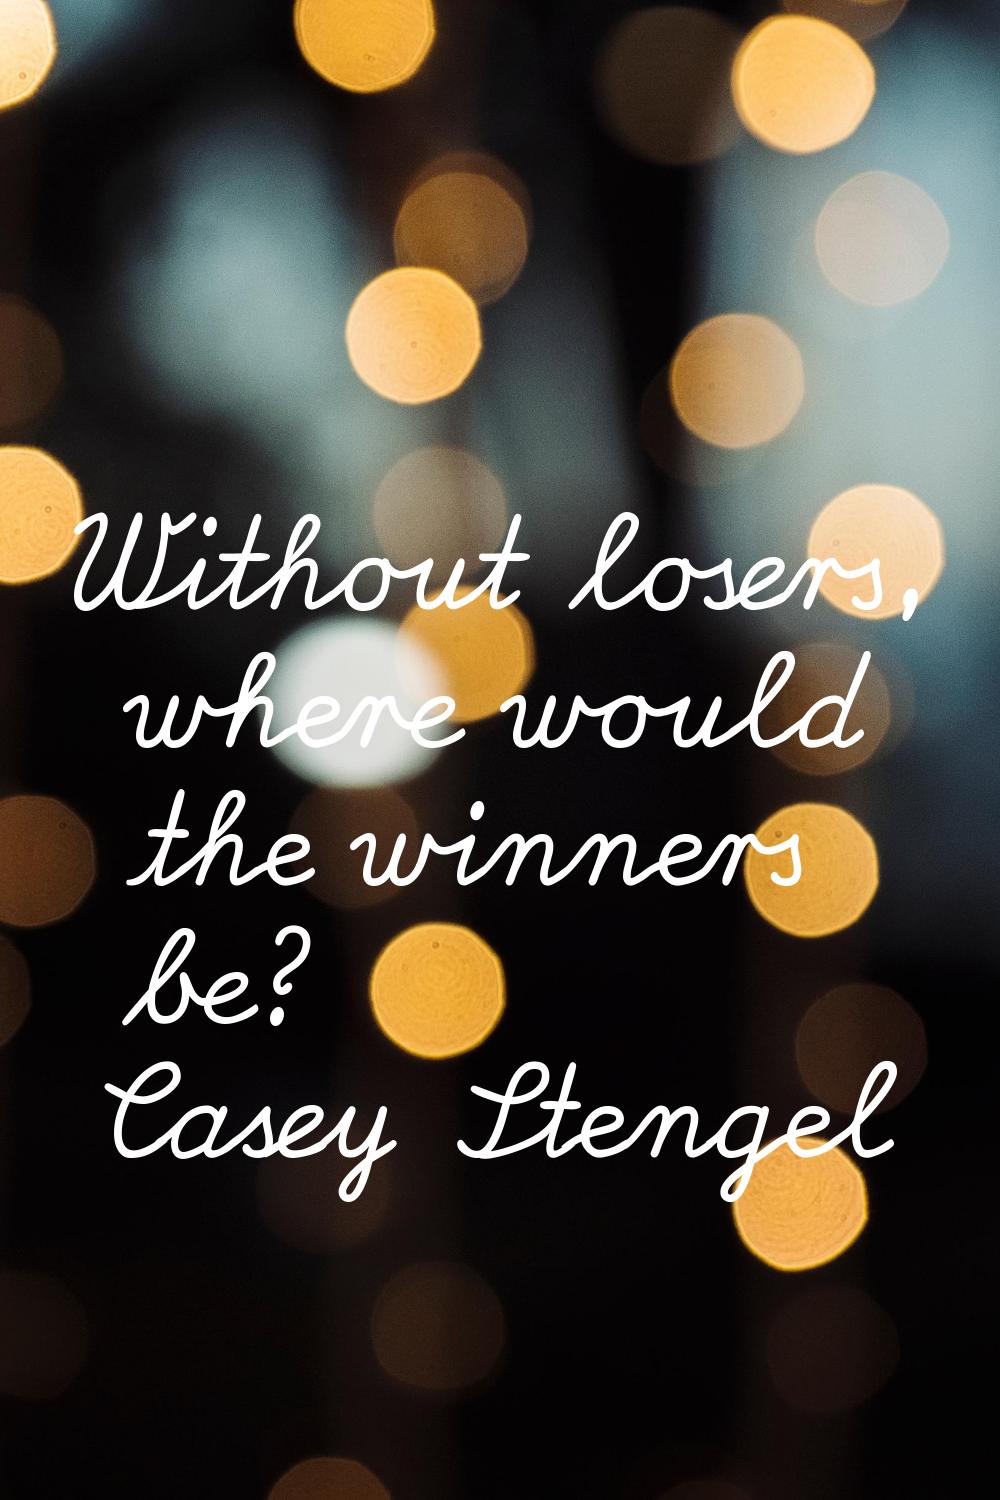 Without losers, where would the winners be?